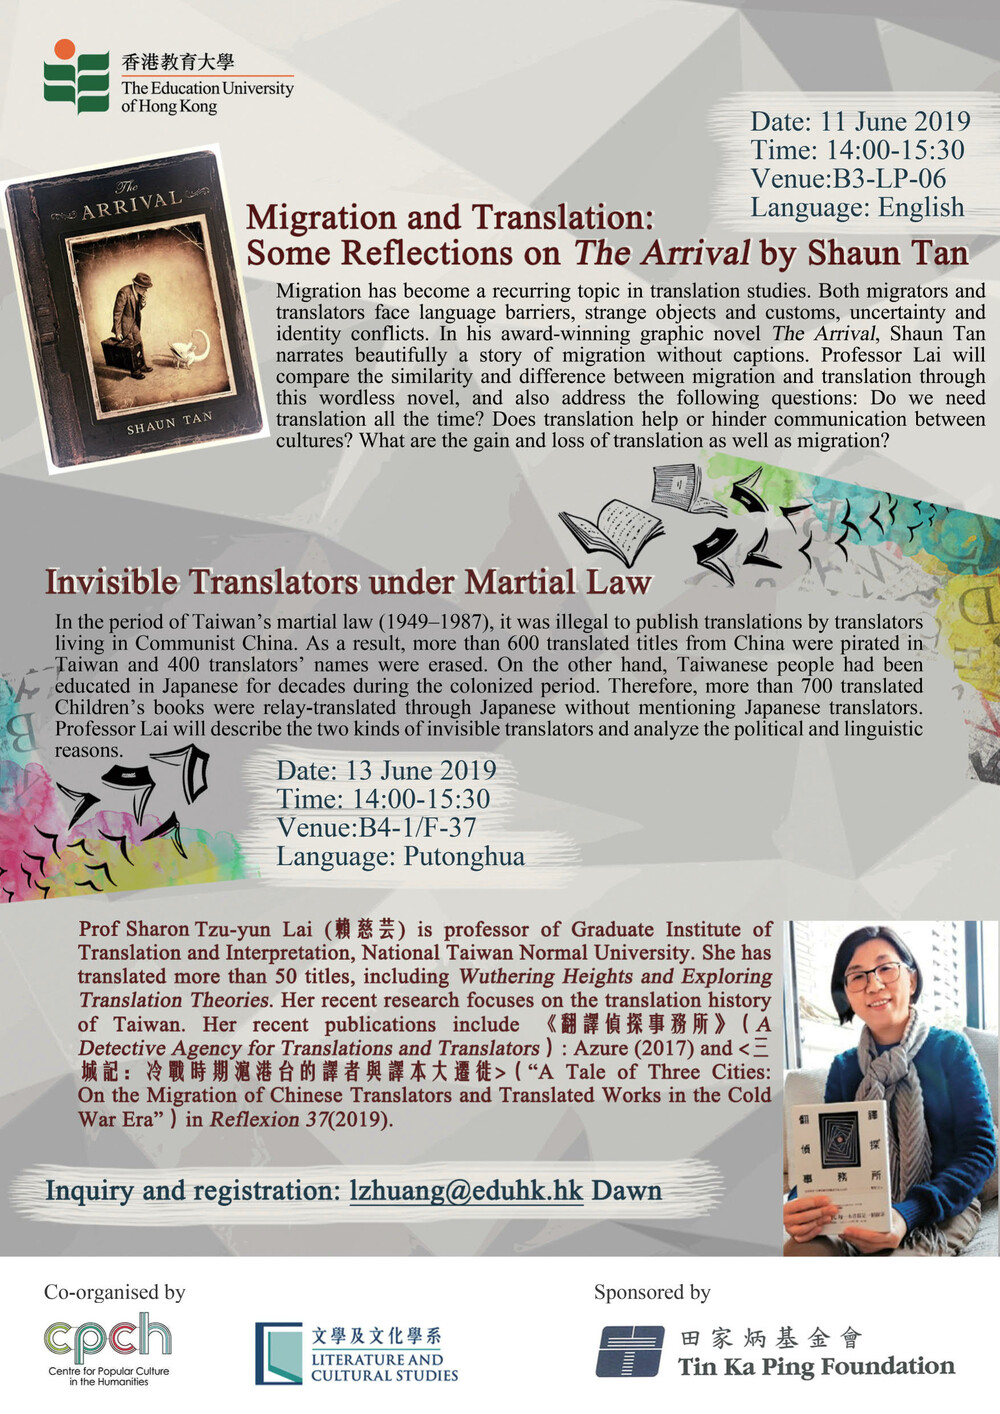 Seminar 1: Migration and Translation: Some Reflections on The Arrival by Shaun Tan Seminar 2: Invisible Translators under Martial Law